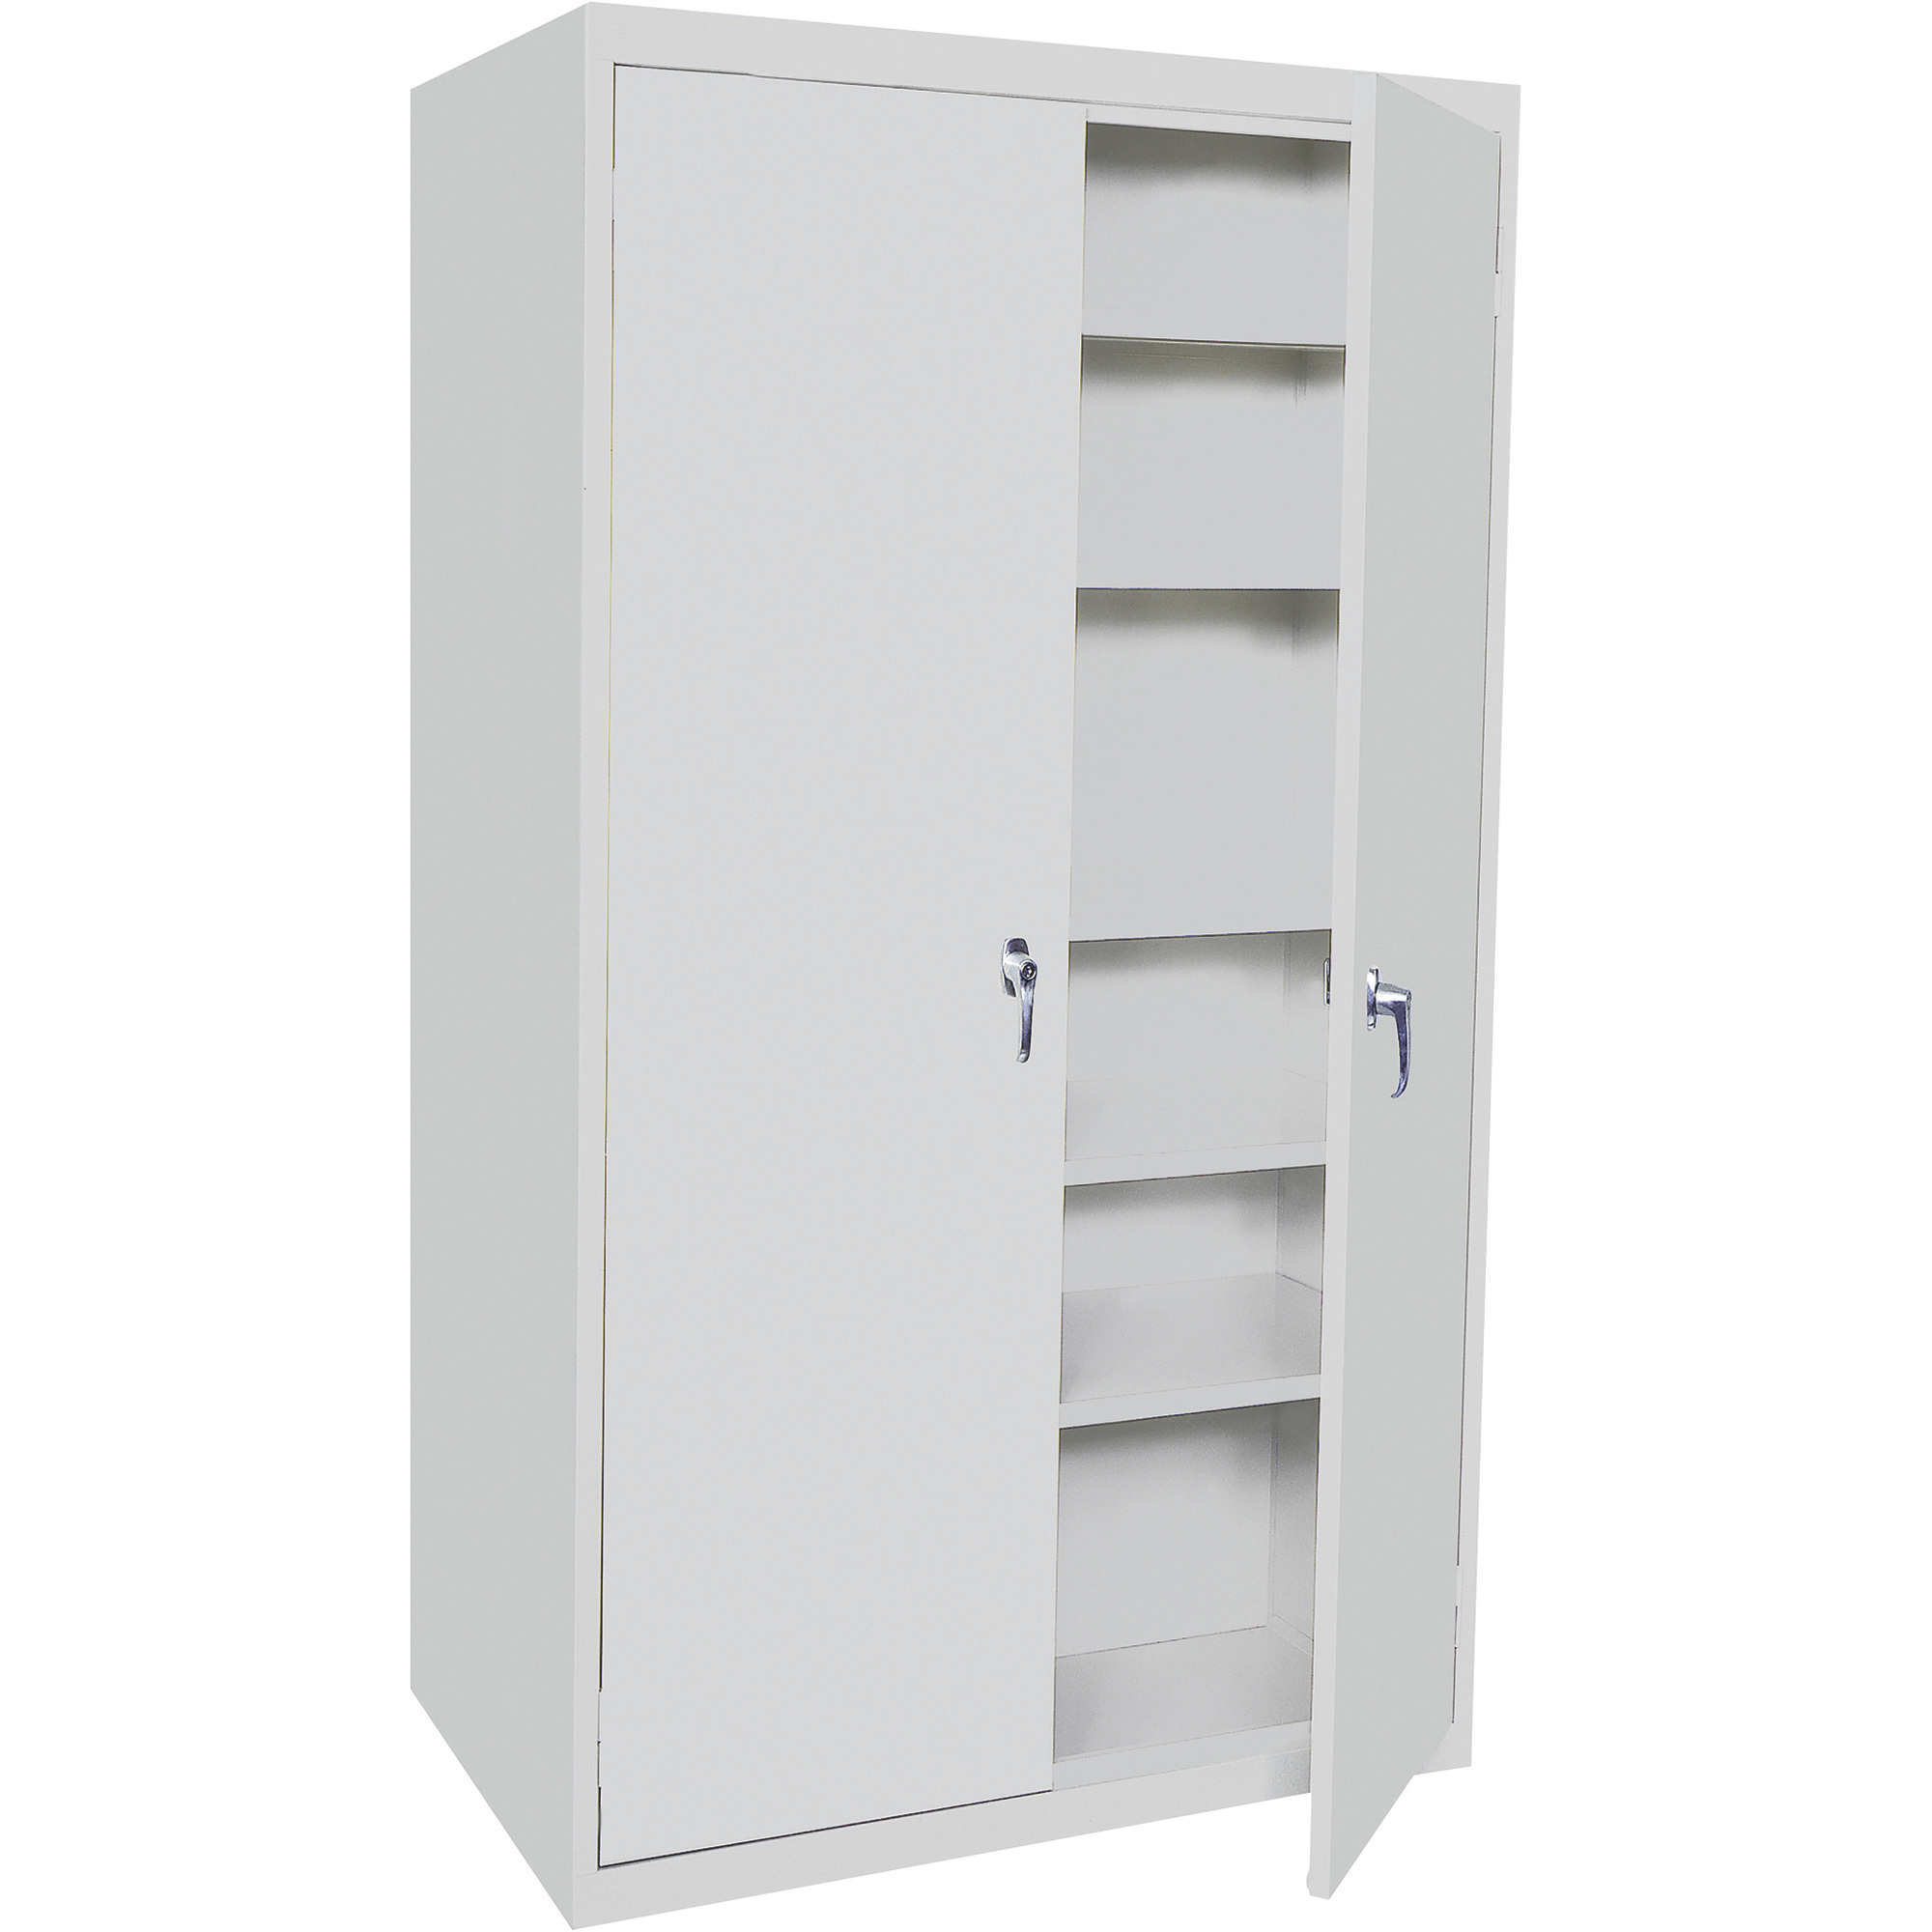 Storage Cabinet — Gray, 3 Adjustable Shelves/2 Fixed Shelves, 36Inch W x 18Inch D x 78Inch H, Model - Steel Cabinets USA 5-7818-AF-G